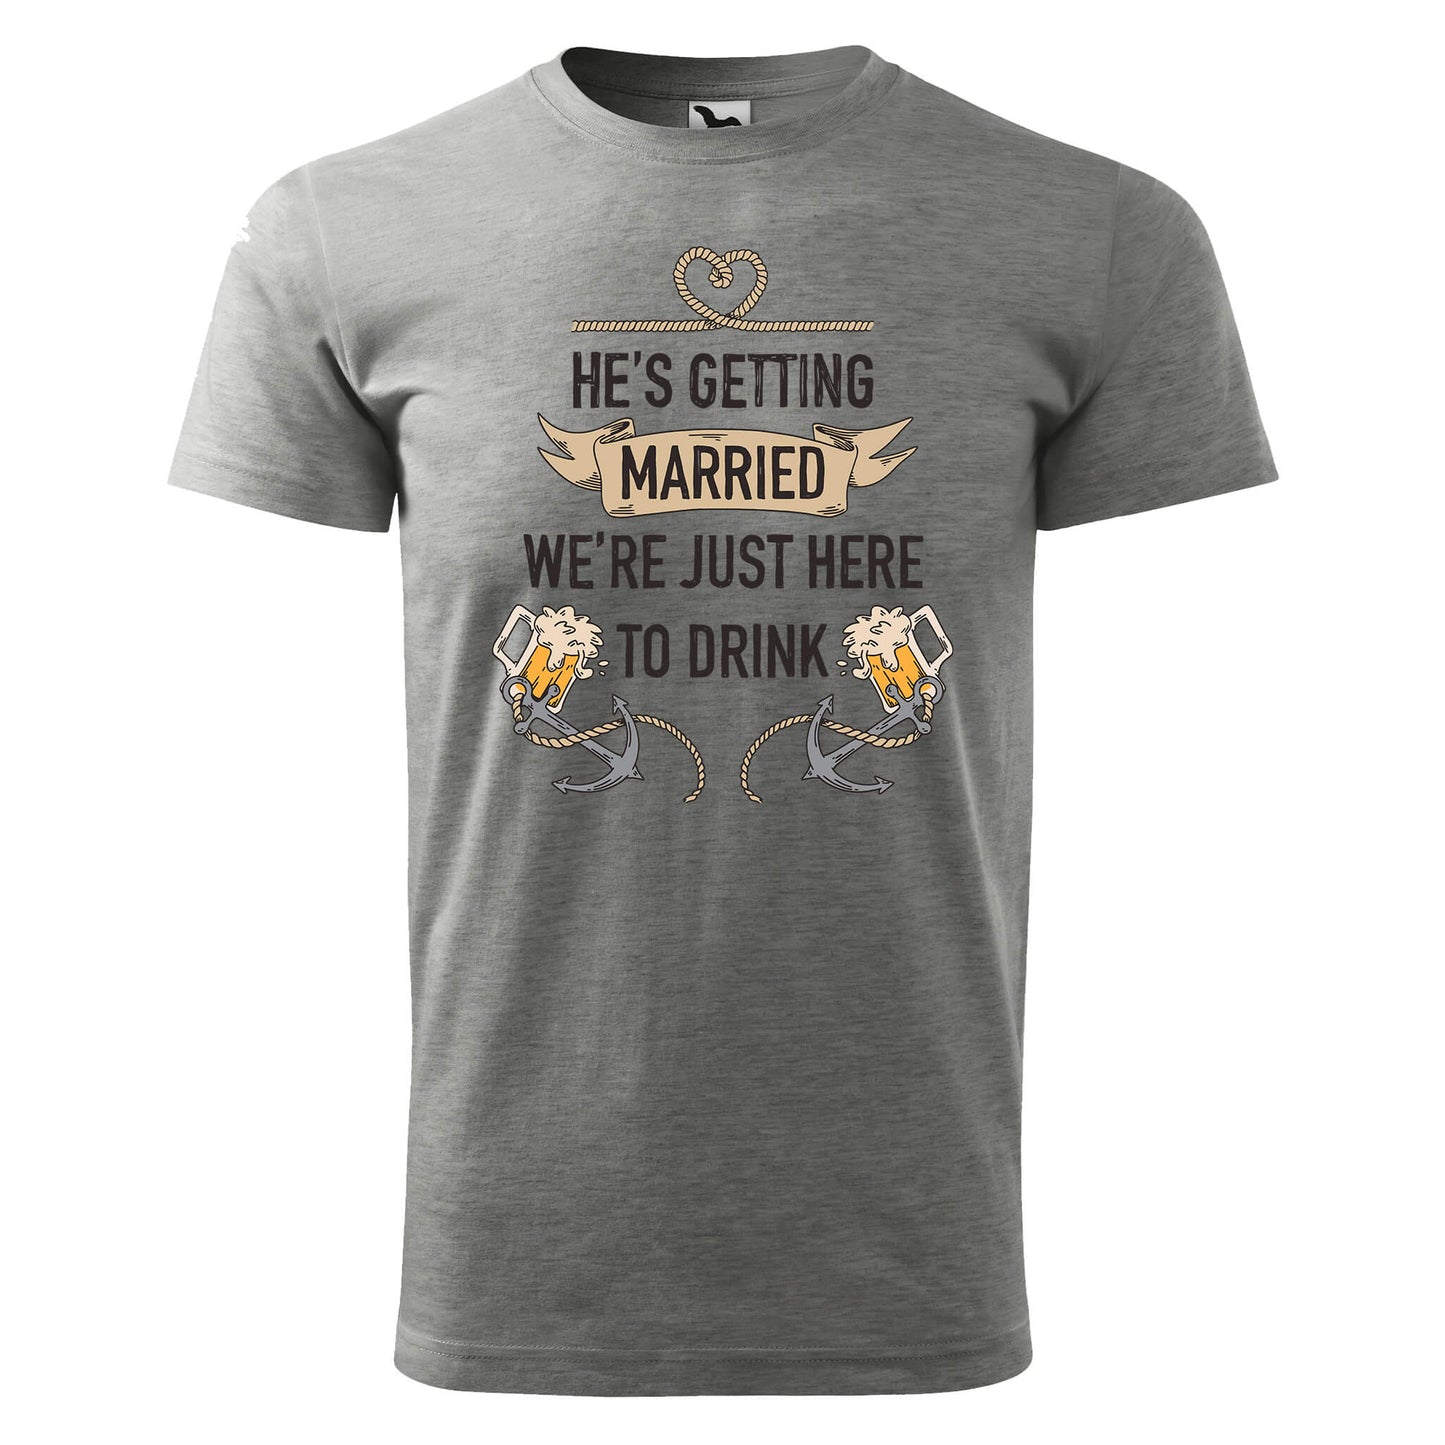 Hes getting married t-shirt - rvdesignprint